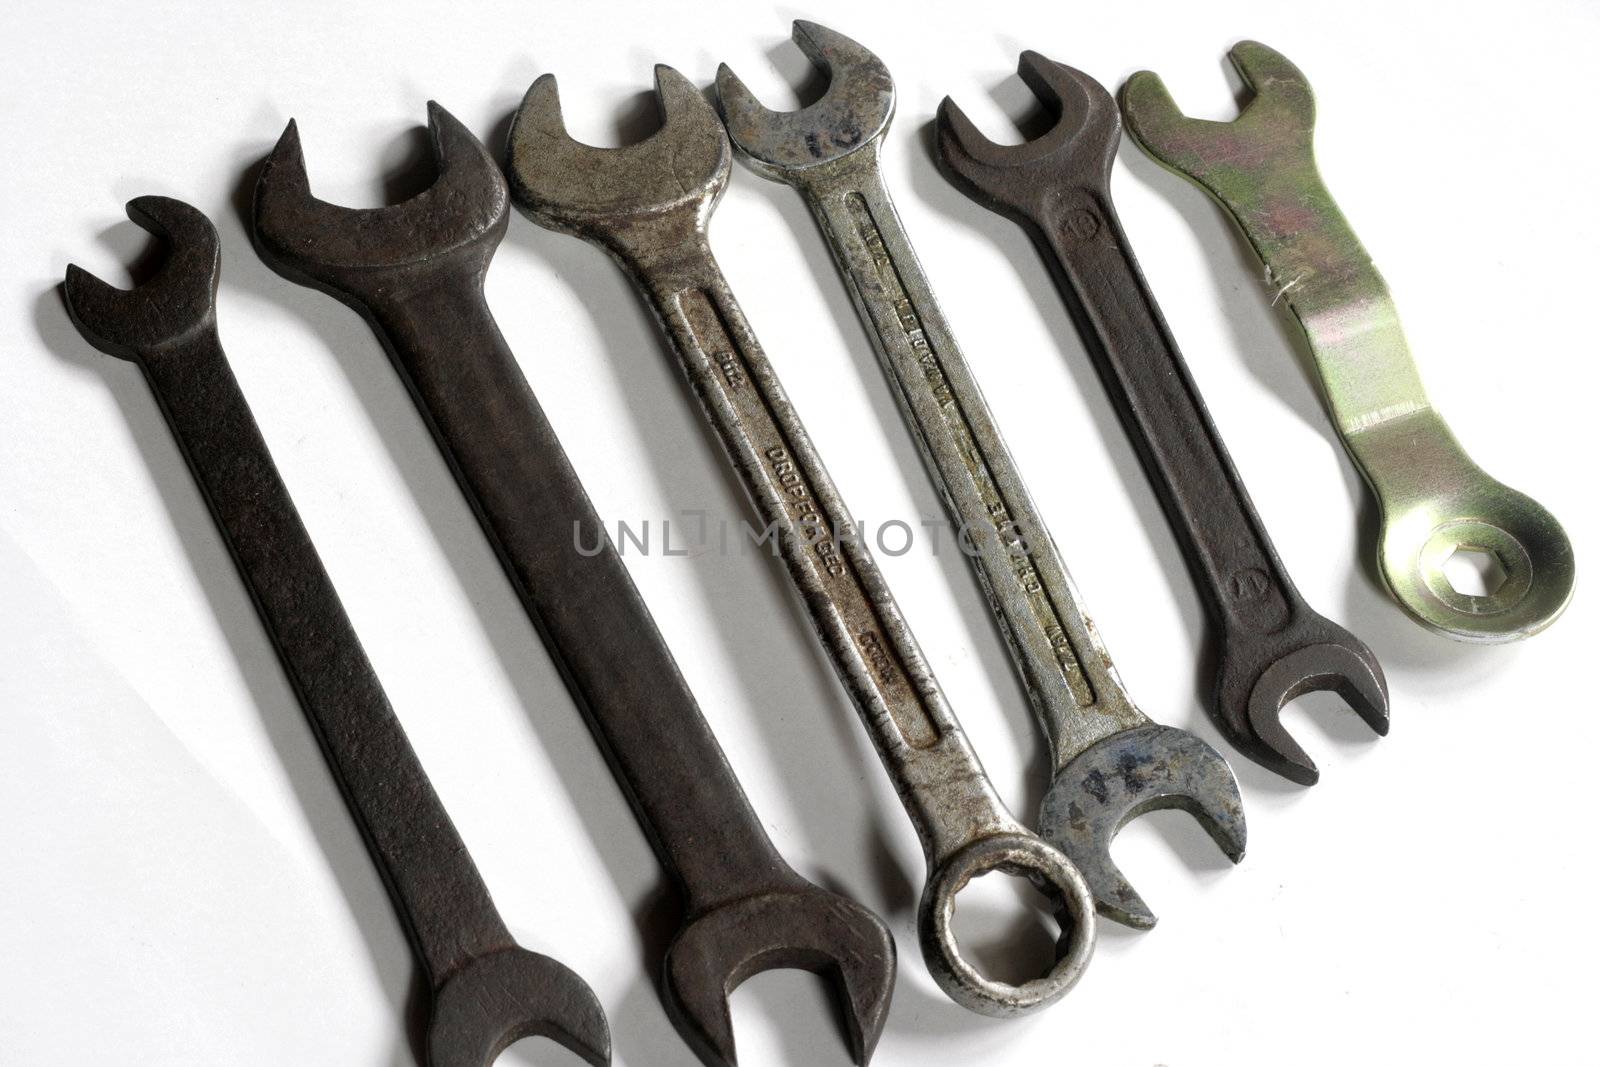 Tools - Spanners by sacatani